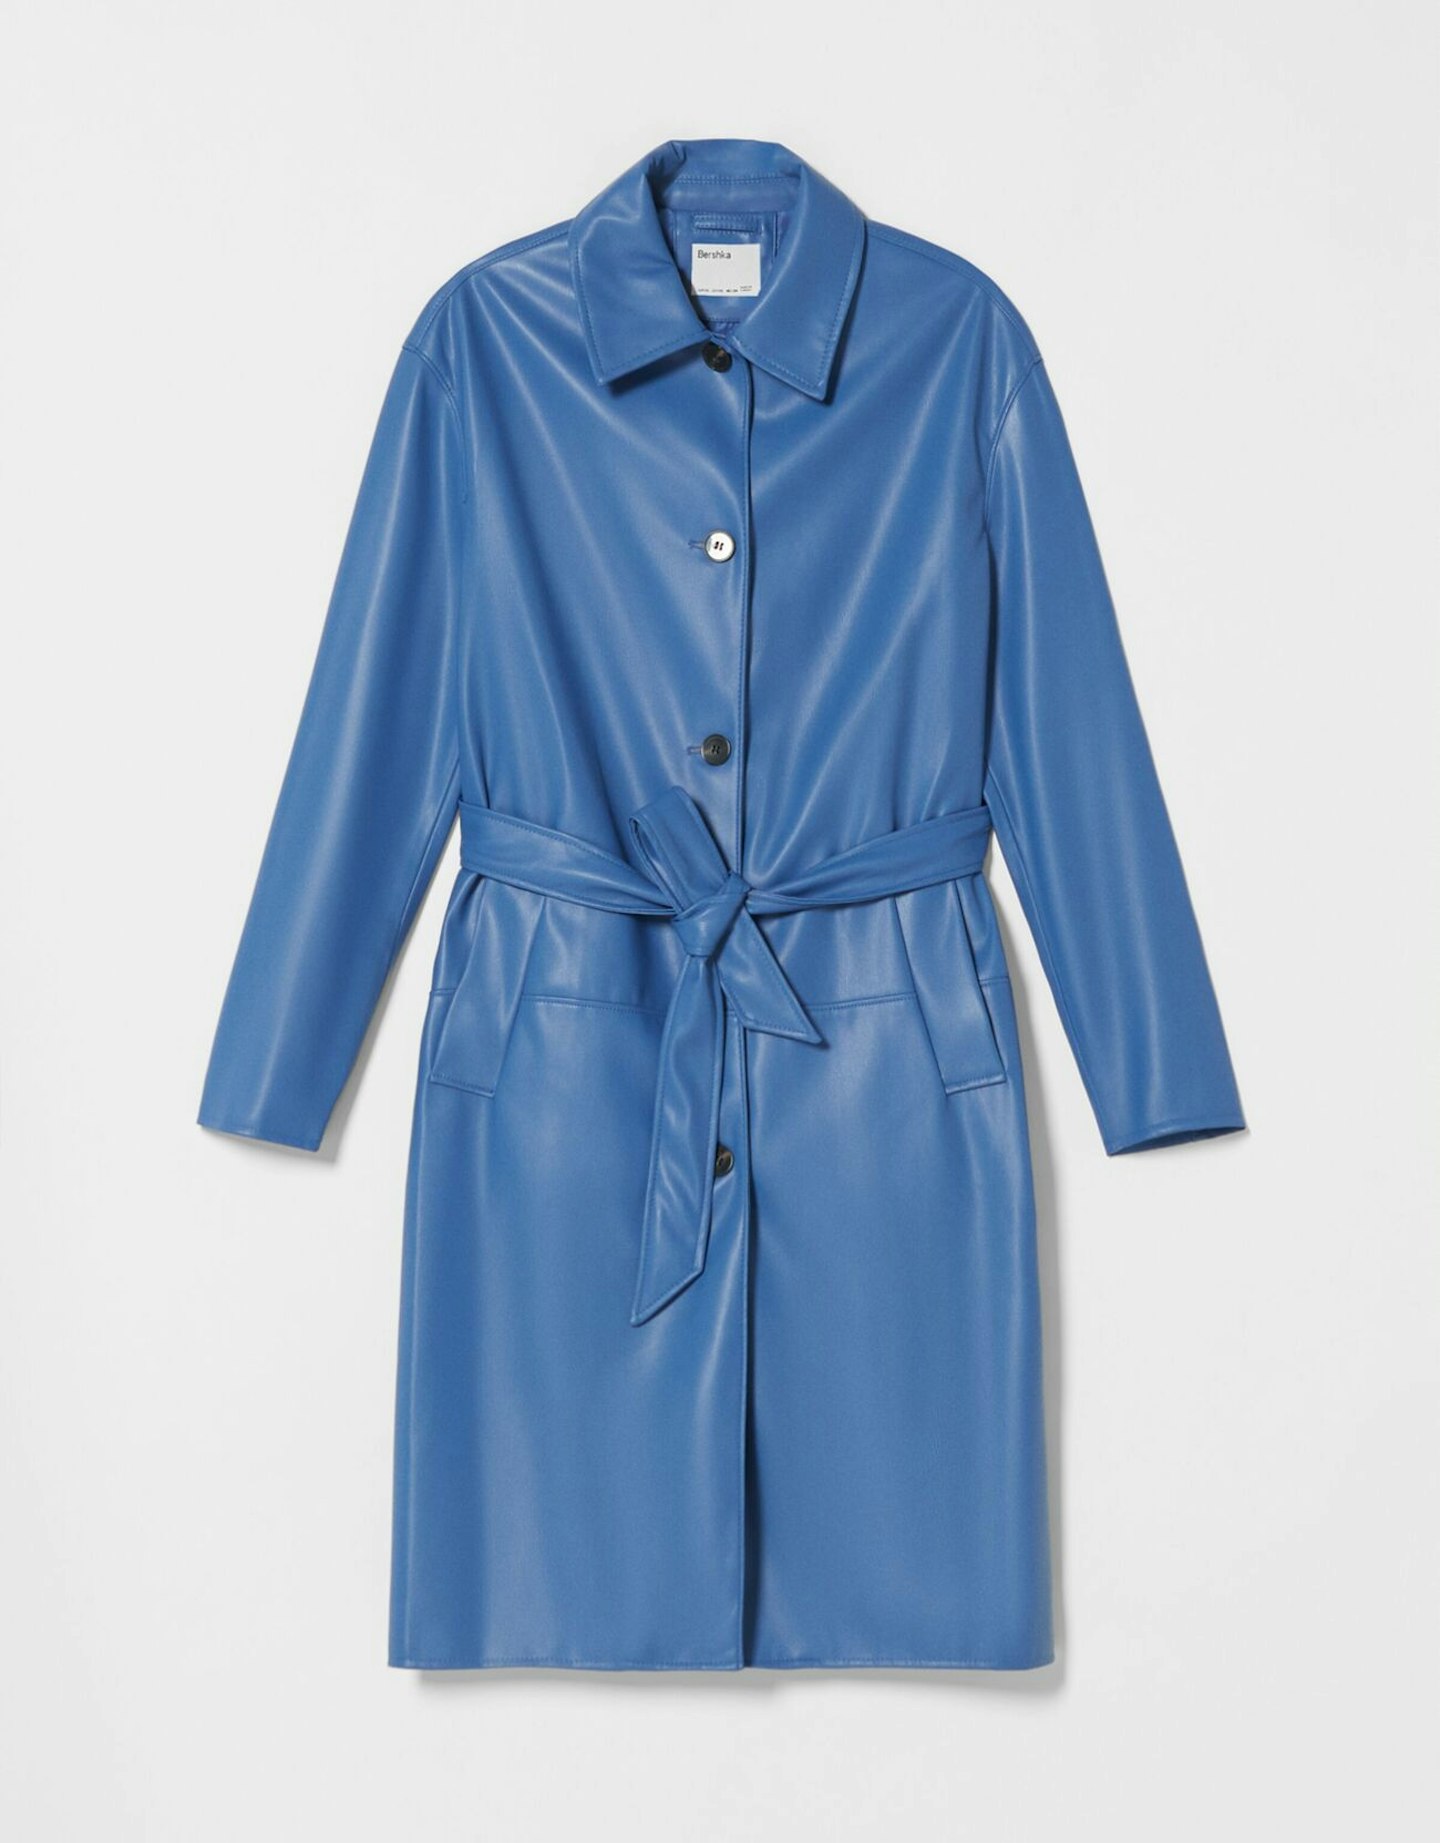 Faux-Leather Trench Coat, £34.99